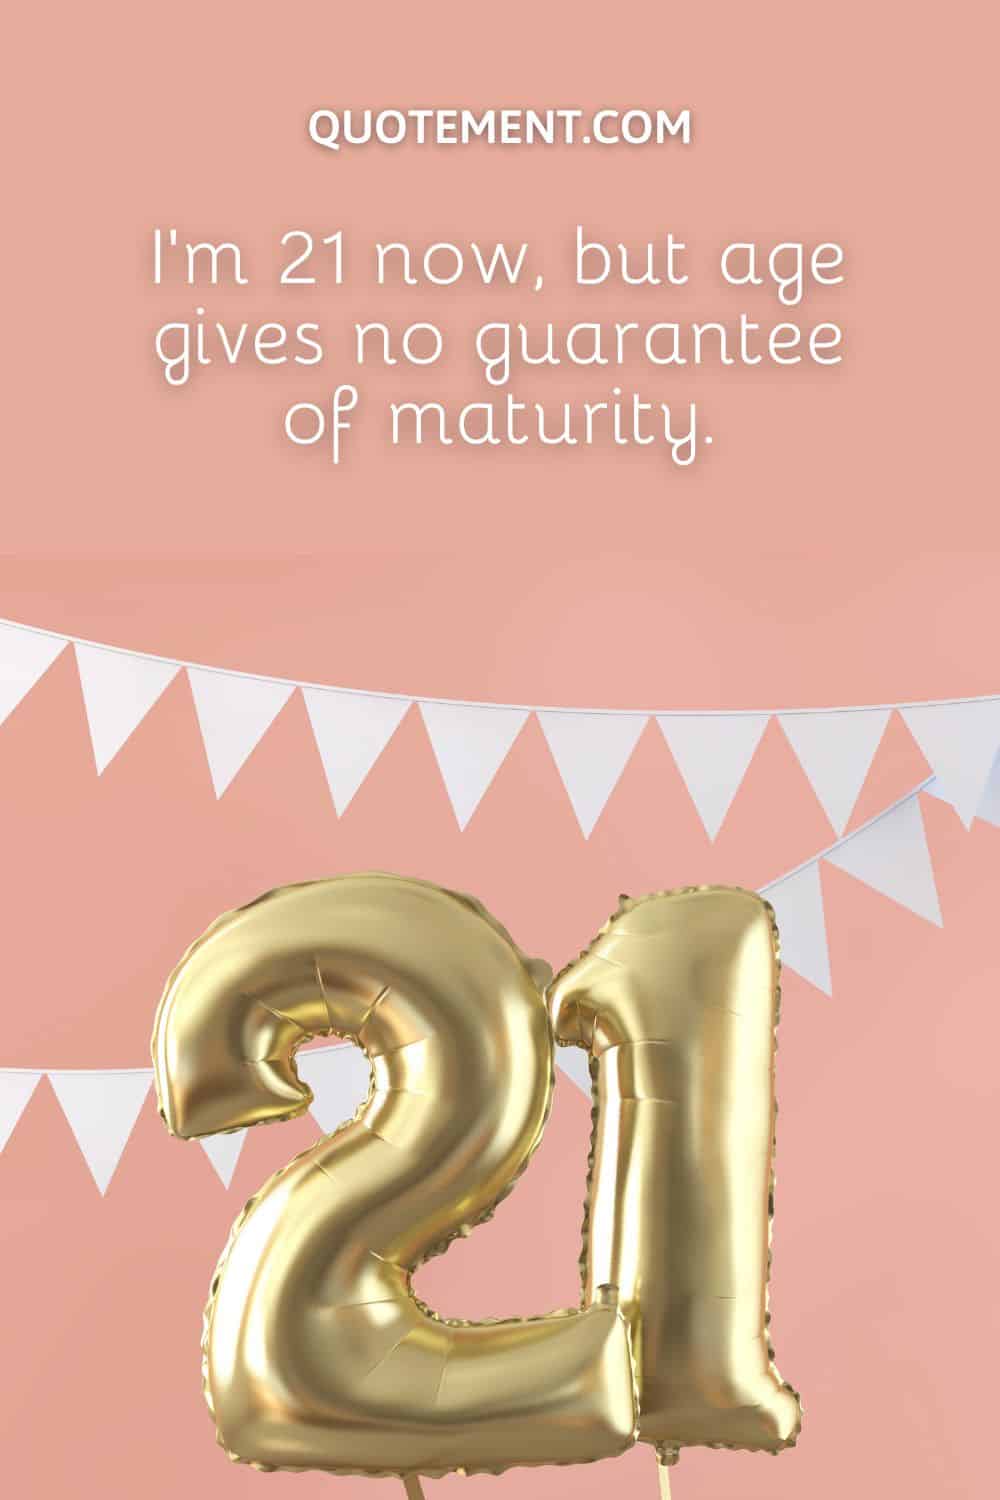 I’m 21 now, but age gives no guarantee of maturity